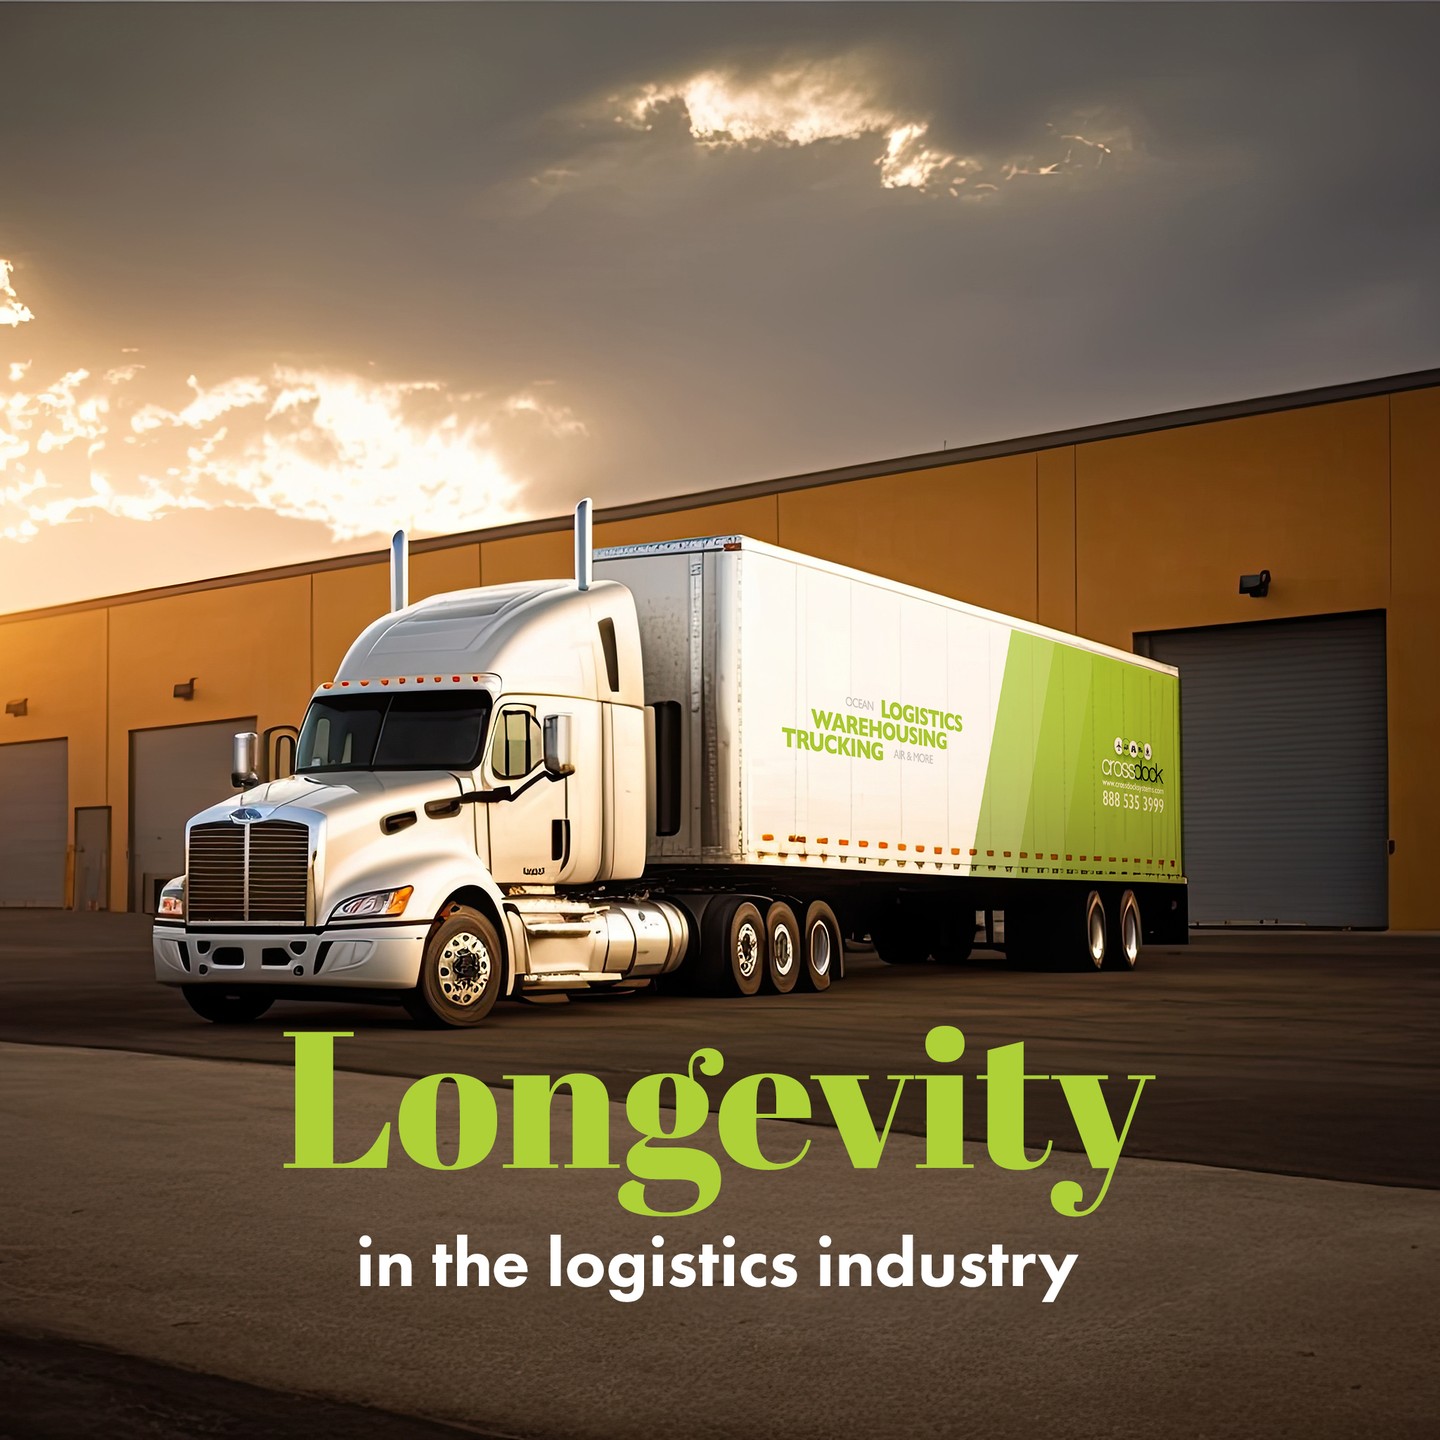 In the logistics industry, longevity is a testament to reliability, innovation, and unwavering commitment to excellence. At Crossdock Systems, we are proud of our enduring presence in the market, which speaks volumes about our ability to adapt, grow, and continuously meet the evolving needs of our clients.

Our sustained success is built on a foundation of deep industry knowledge, cutting-edge technology, and a client-centric approach. Over the years, we have navigated countless challenges, emerging stronger and more resilient each time. This resilience is what enables us to provide our clients with robust and flexible logistics solutions, no matter how complex their requirements.

Longevity in logistics isn't just about surviving; it's about thriving and leading the way. It's about forging long-term partnerships and consistently delivering value. At Crossdock Systems, our history is marked by innovation, integrity, and an unyielding dedication to our clients' success.

Thank you to our clients, partners, and dedicated team members for being an integral part of our journey. Here's to many more years of moving forward together!

#Logistics #SupplyChain #BusinessSuccess #LogisticsInnovation #ClientPartnerships #IndustryLeadership #FreightSolutions #Warehousing #Transportation #CanadianLogistics #CrossdockSystems